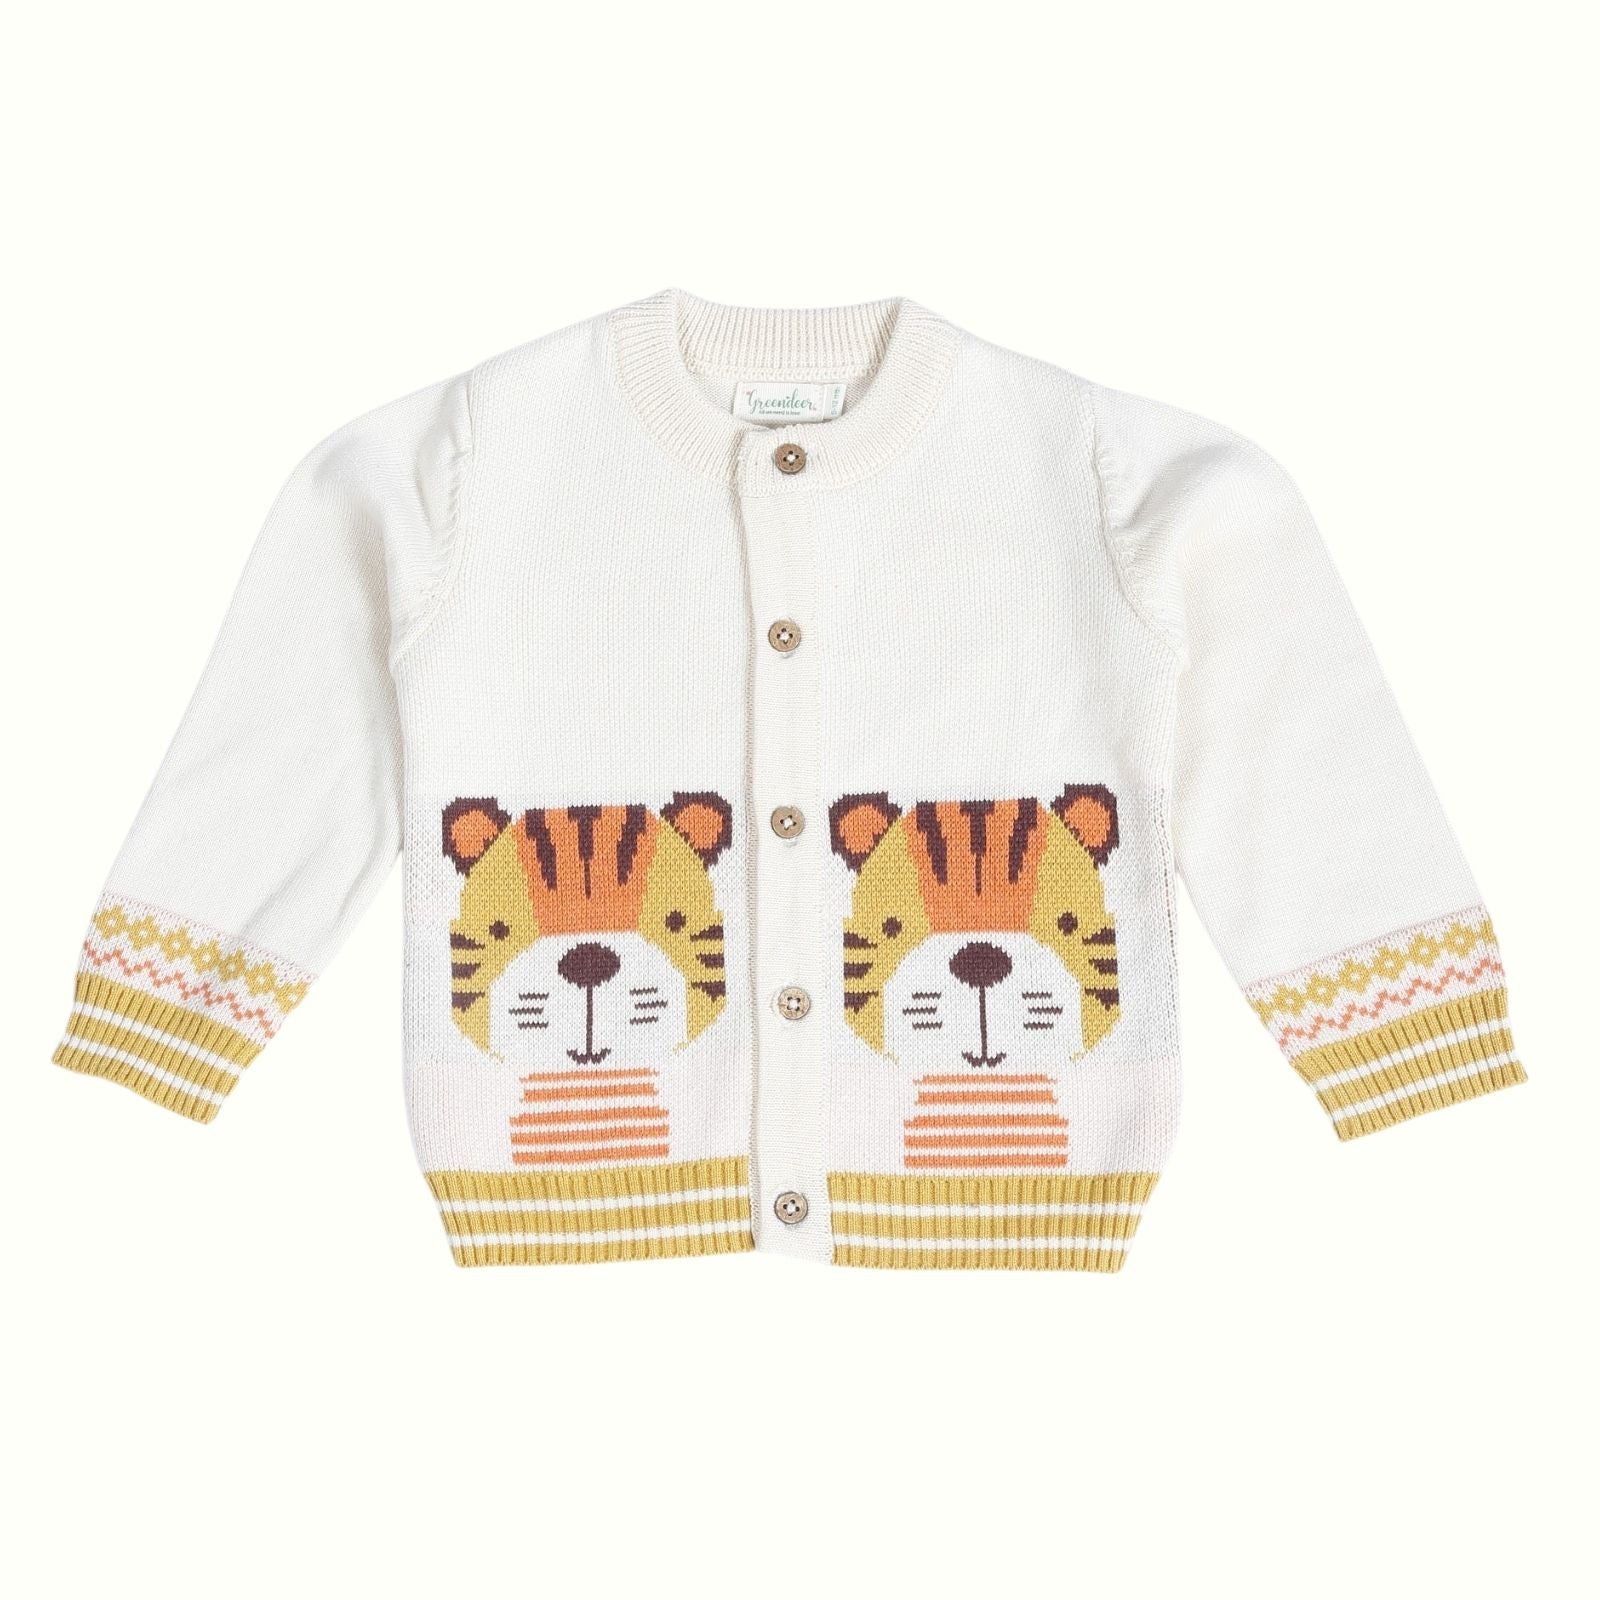 Greendeer Delighted Lion,  Sunny Fox & Adorable Tiger 100% Cotton Sweater Set of 3